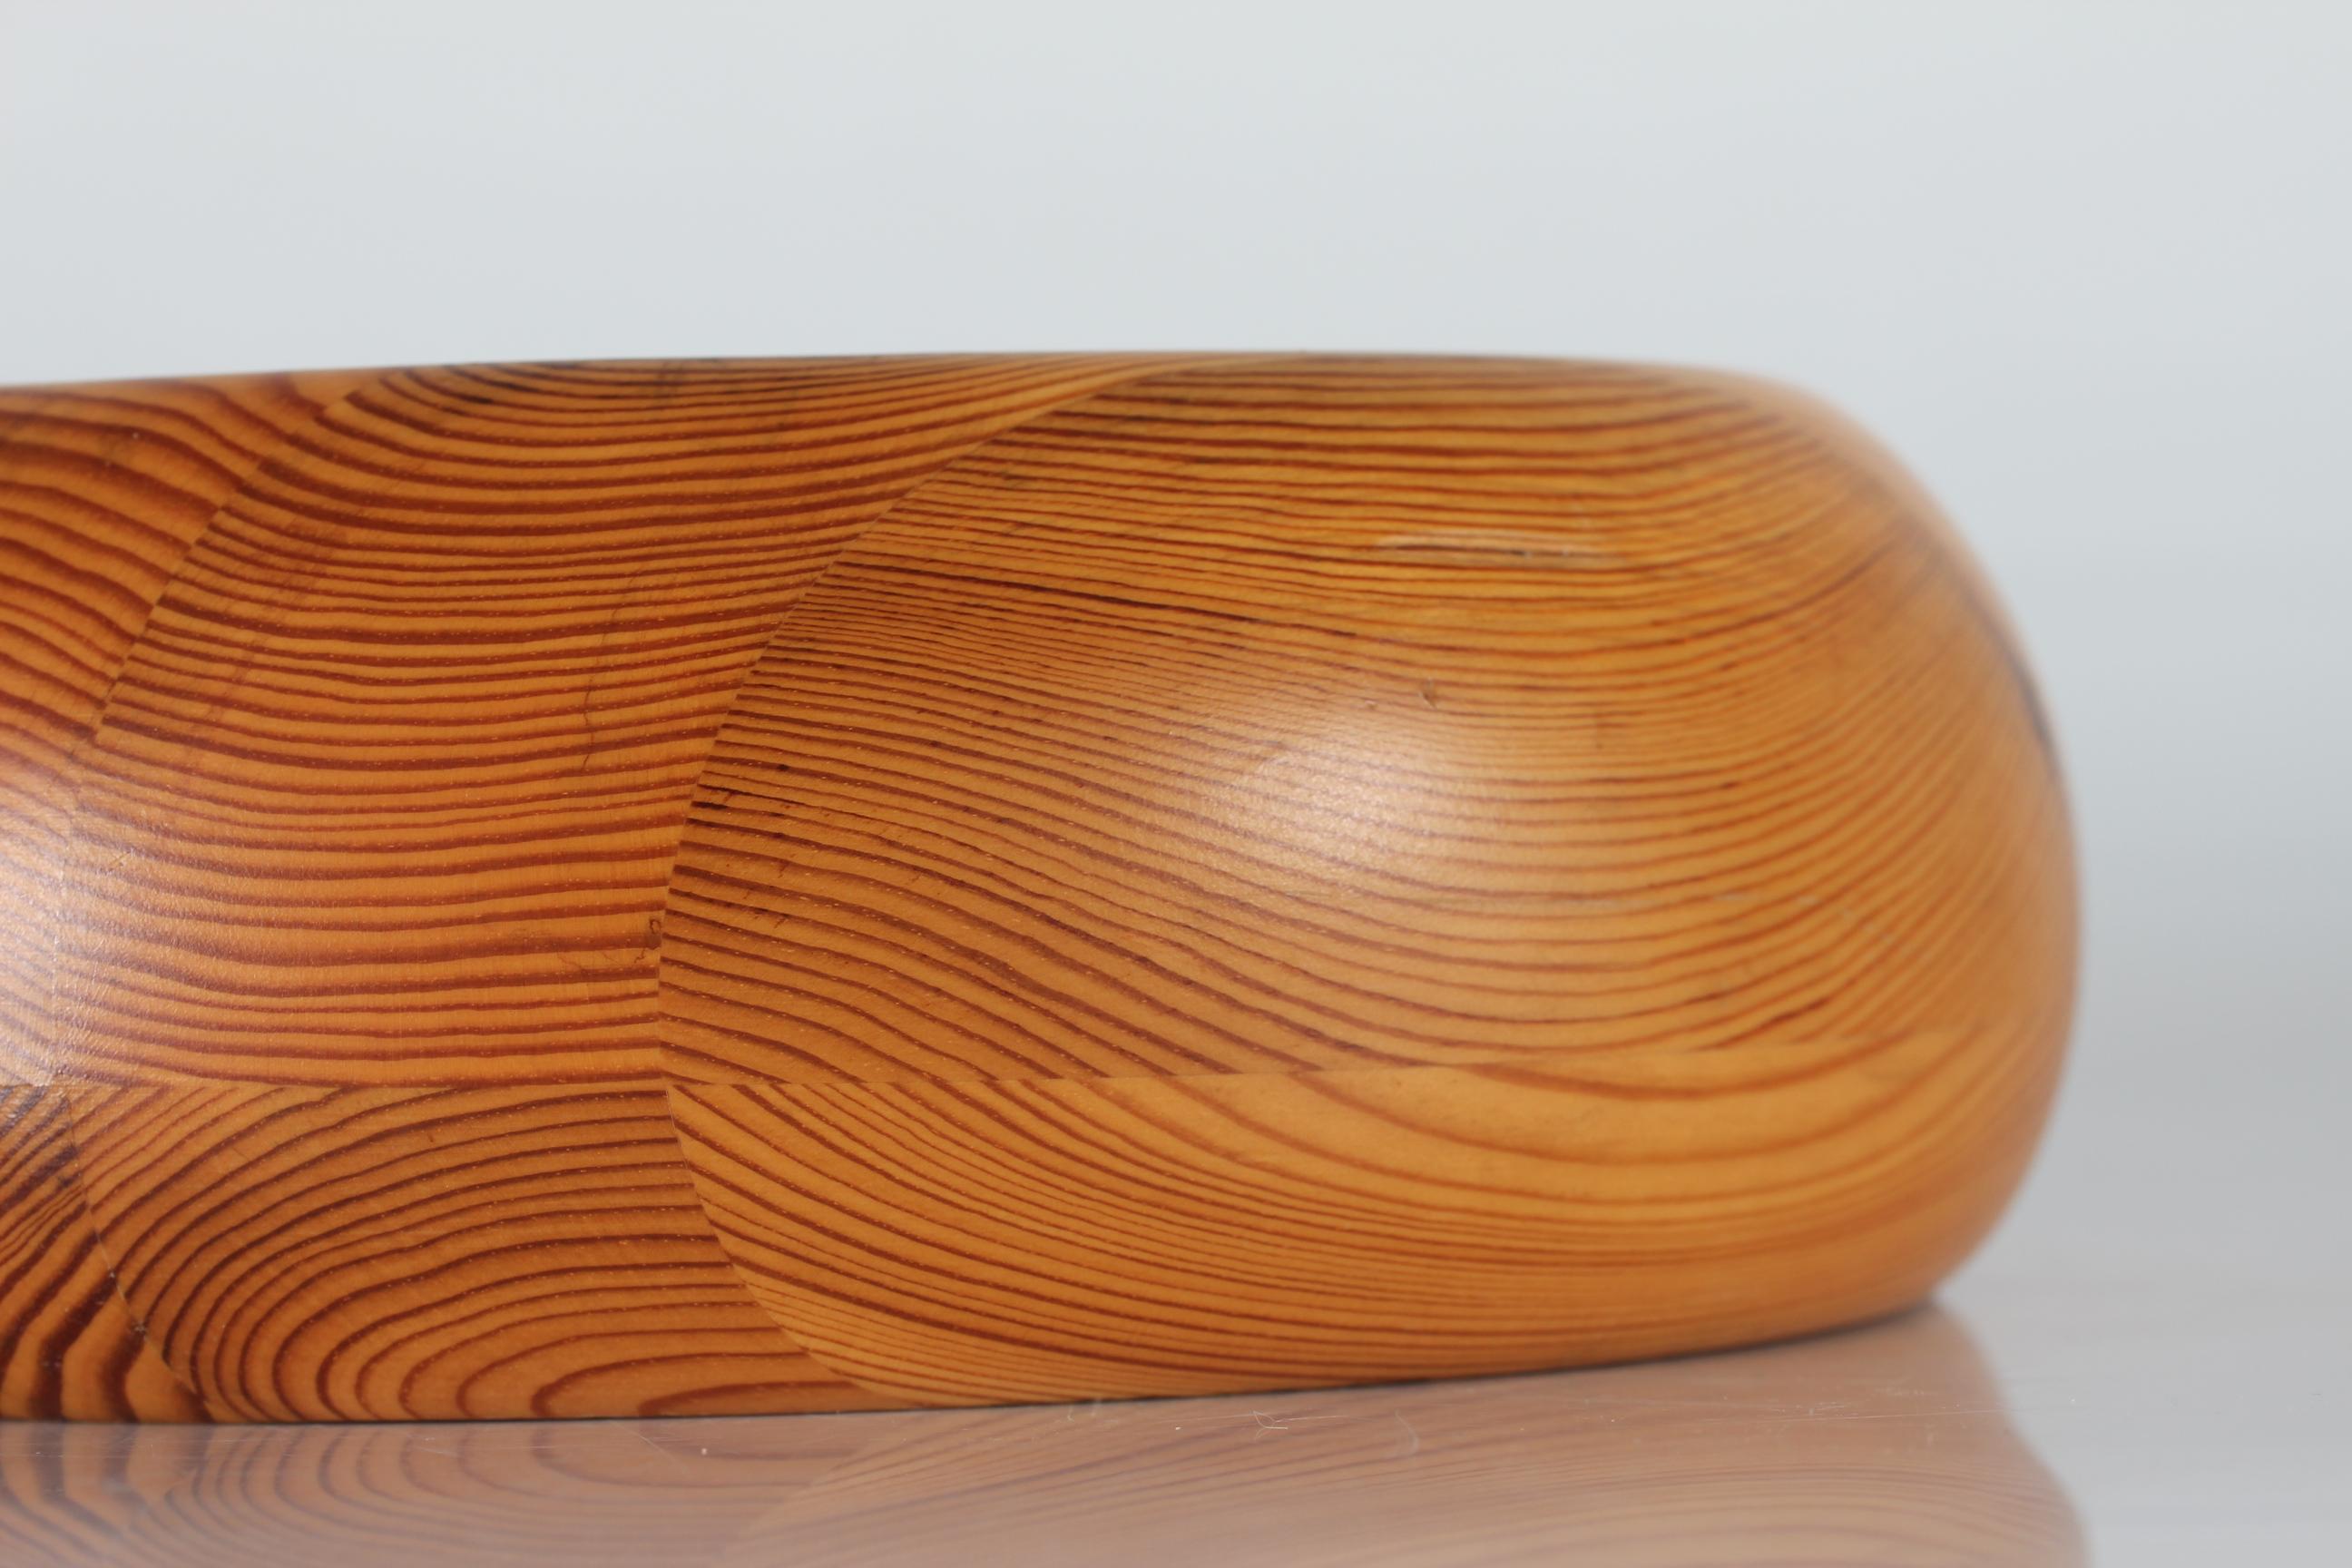 Large bowl of solid pine designed by Stig Johnsson for Smålandsslöjd, Värnamo, Sweden.

The surface of the bowl is treated with transparent matte lacquer.

Nice vintage condition with patina - see images of small scratches.








